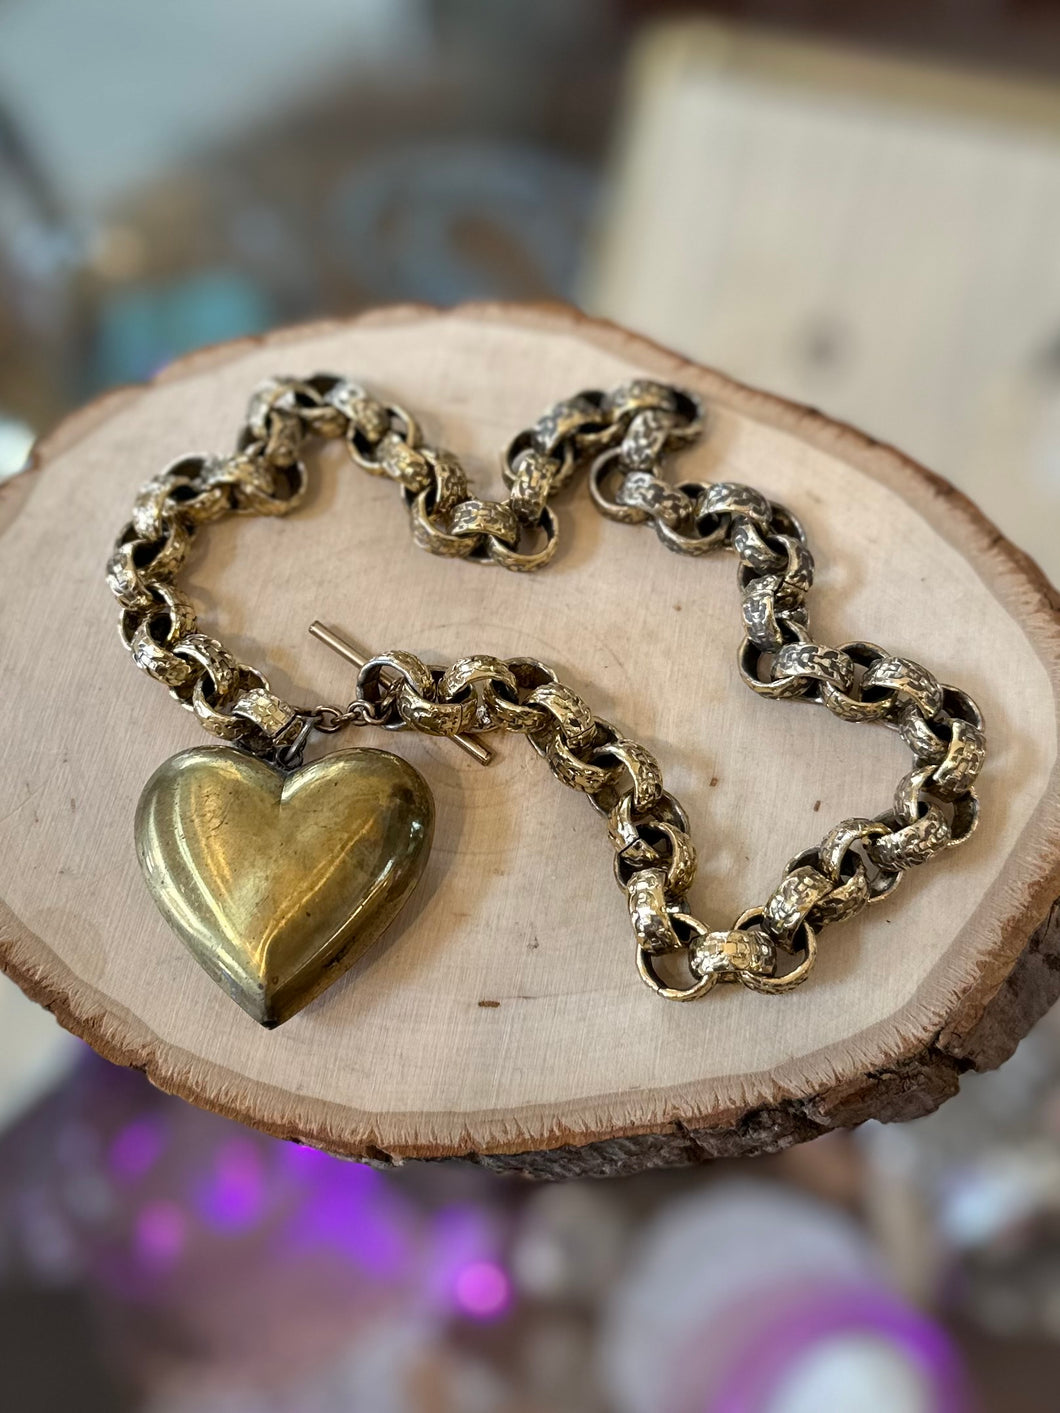 Handmade Chunky Brass Heart Statement Necklace w/ Toggle Clasp - Heart of Metal